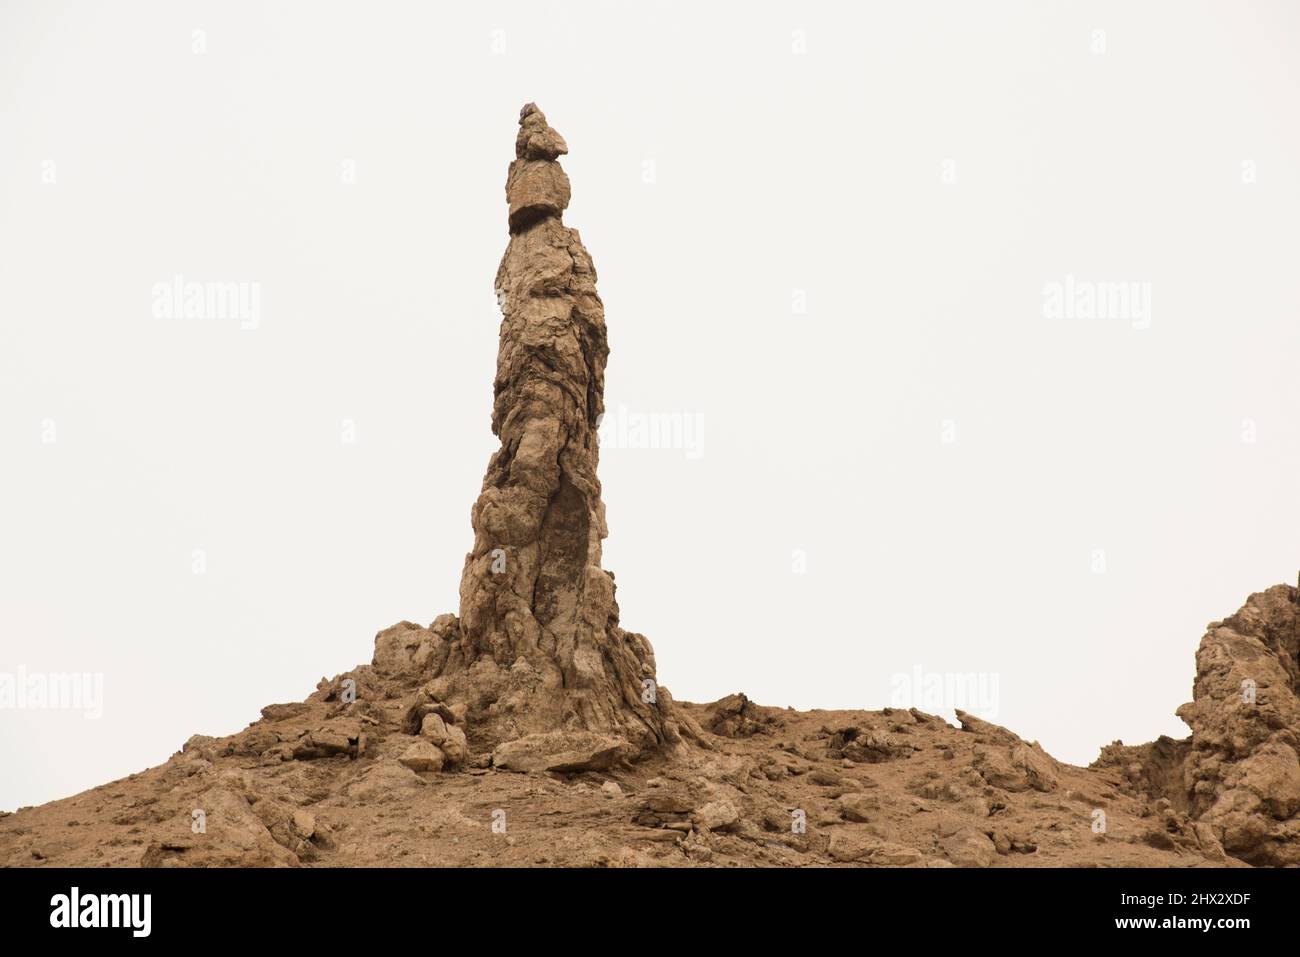 Natural monolith of salt and clay named Lot's wife located near Dead Sea, Jordan. Stock Photo